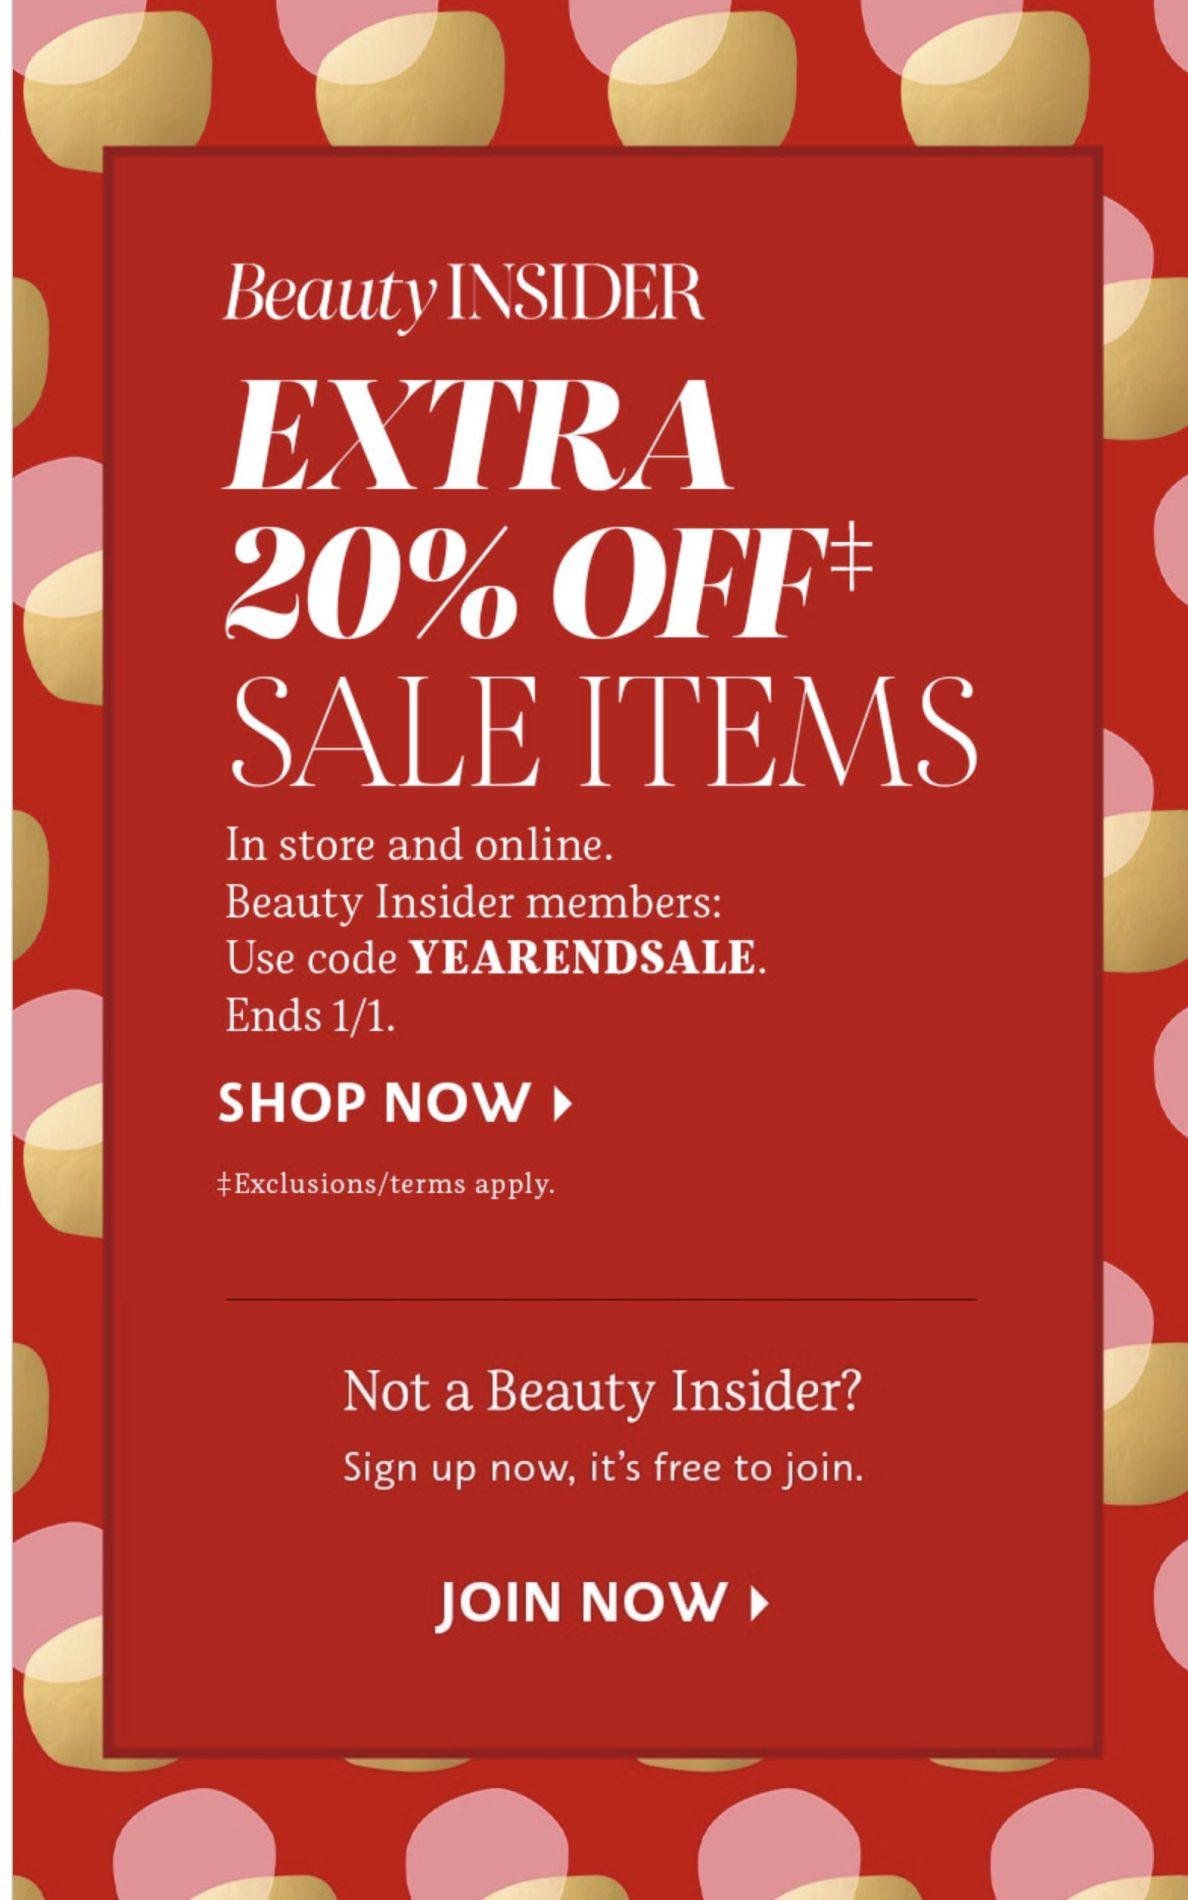 Sephora Sale – Save An Additional 20% Off Sale items!